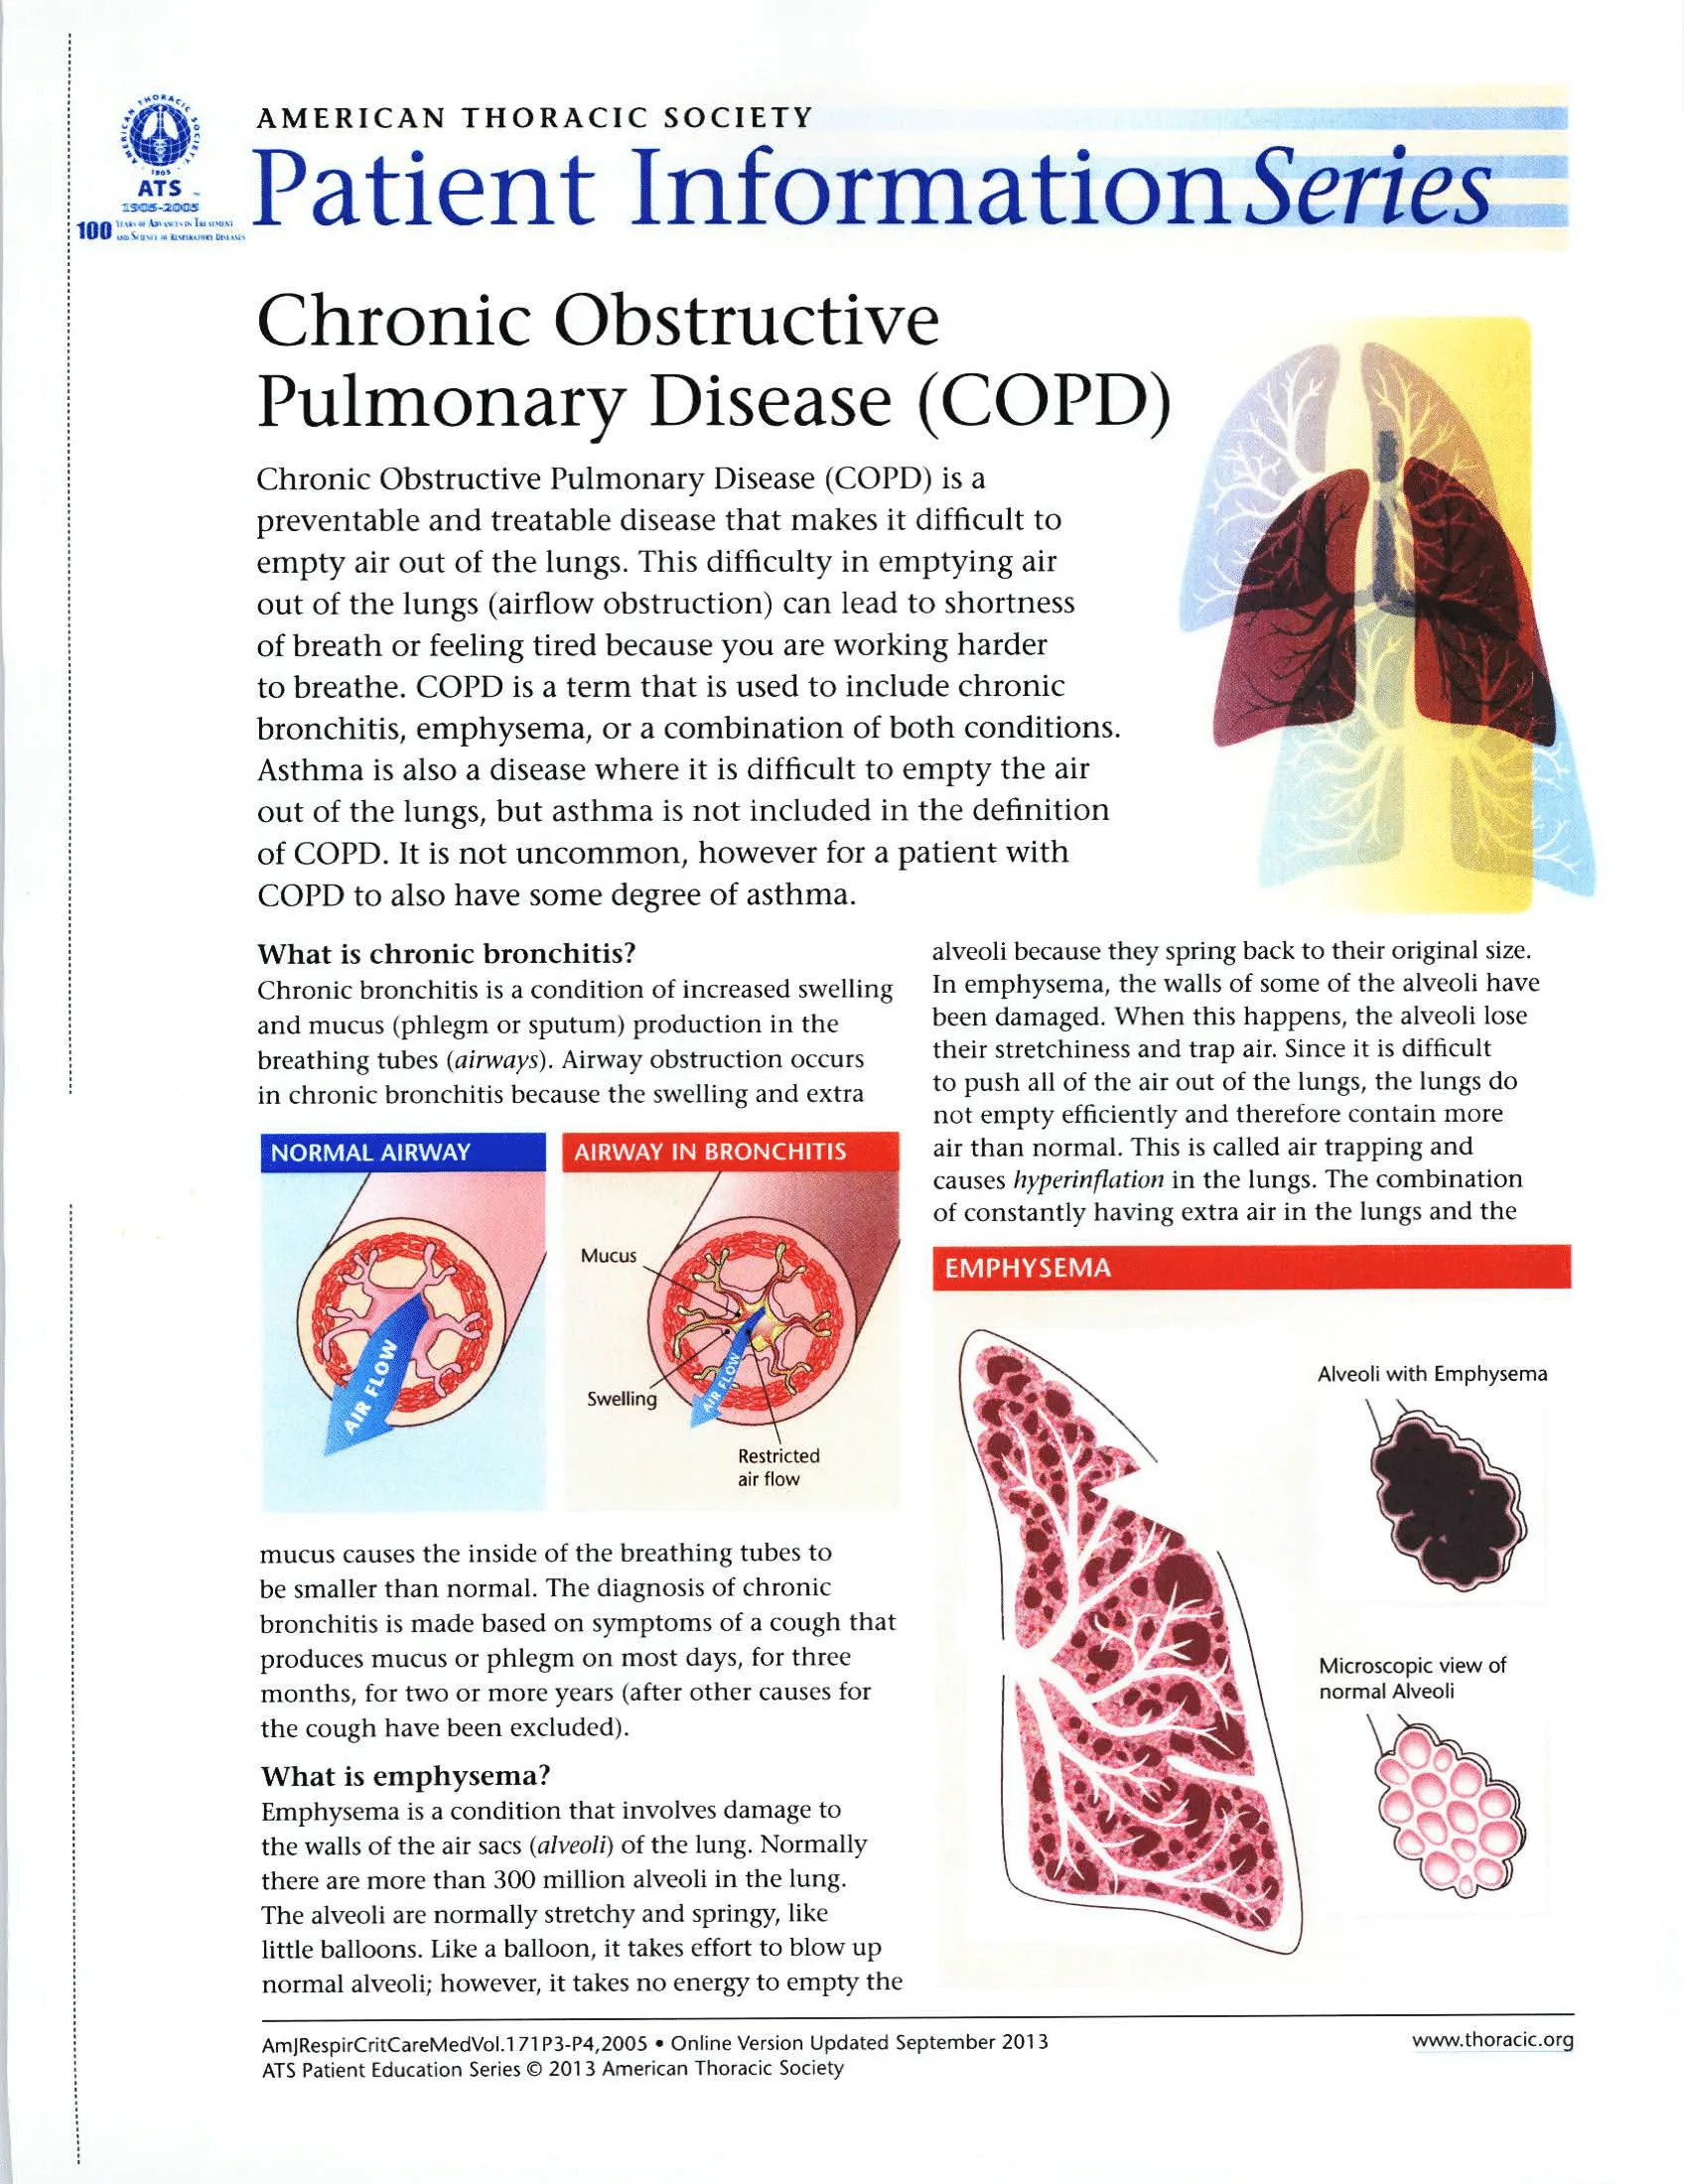 copd-info-1